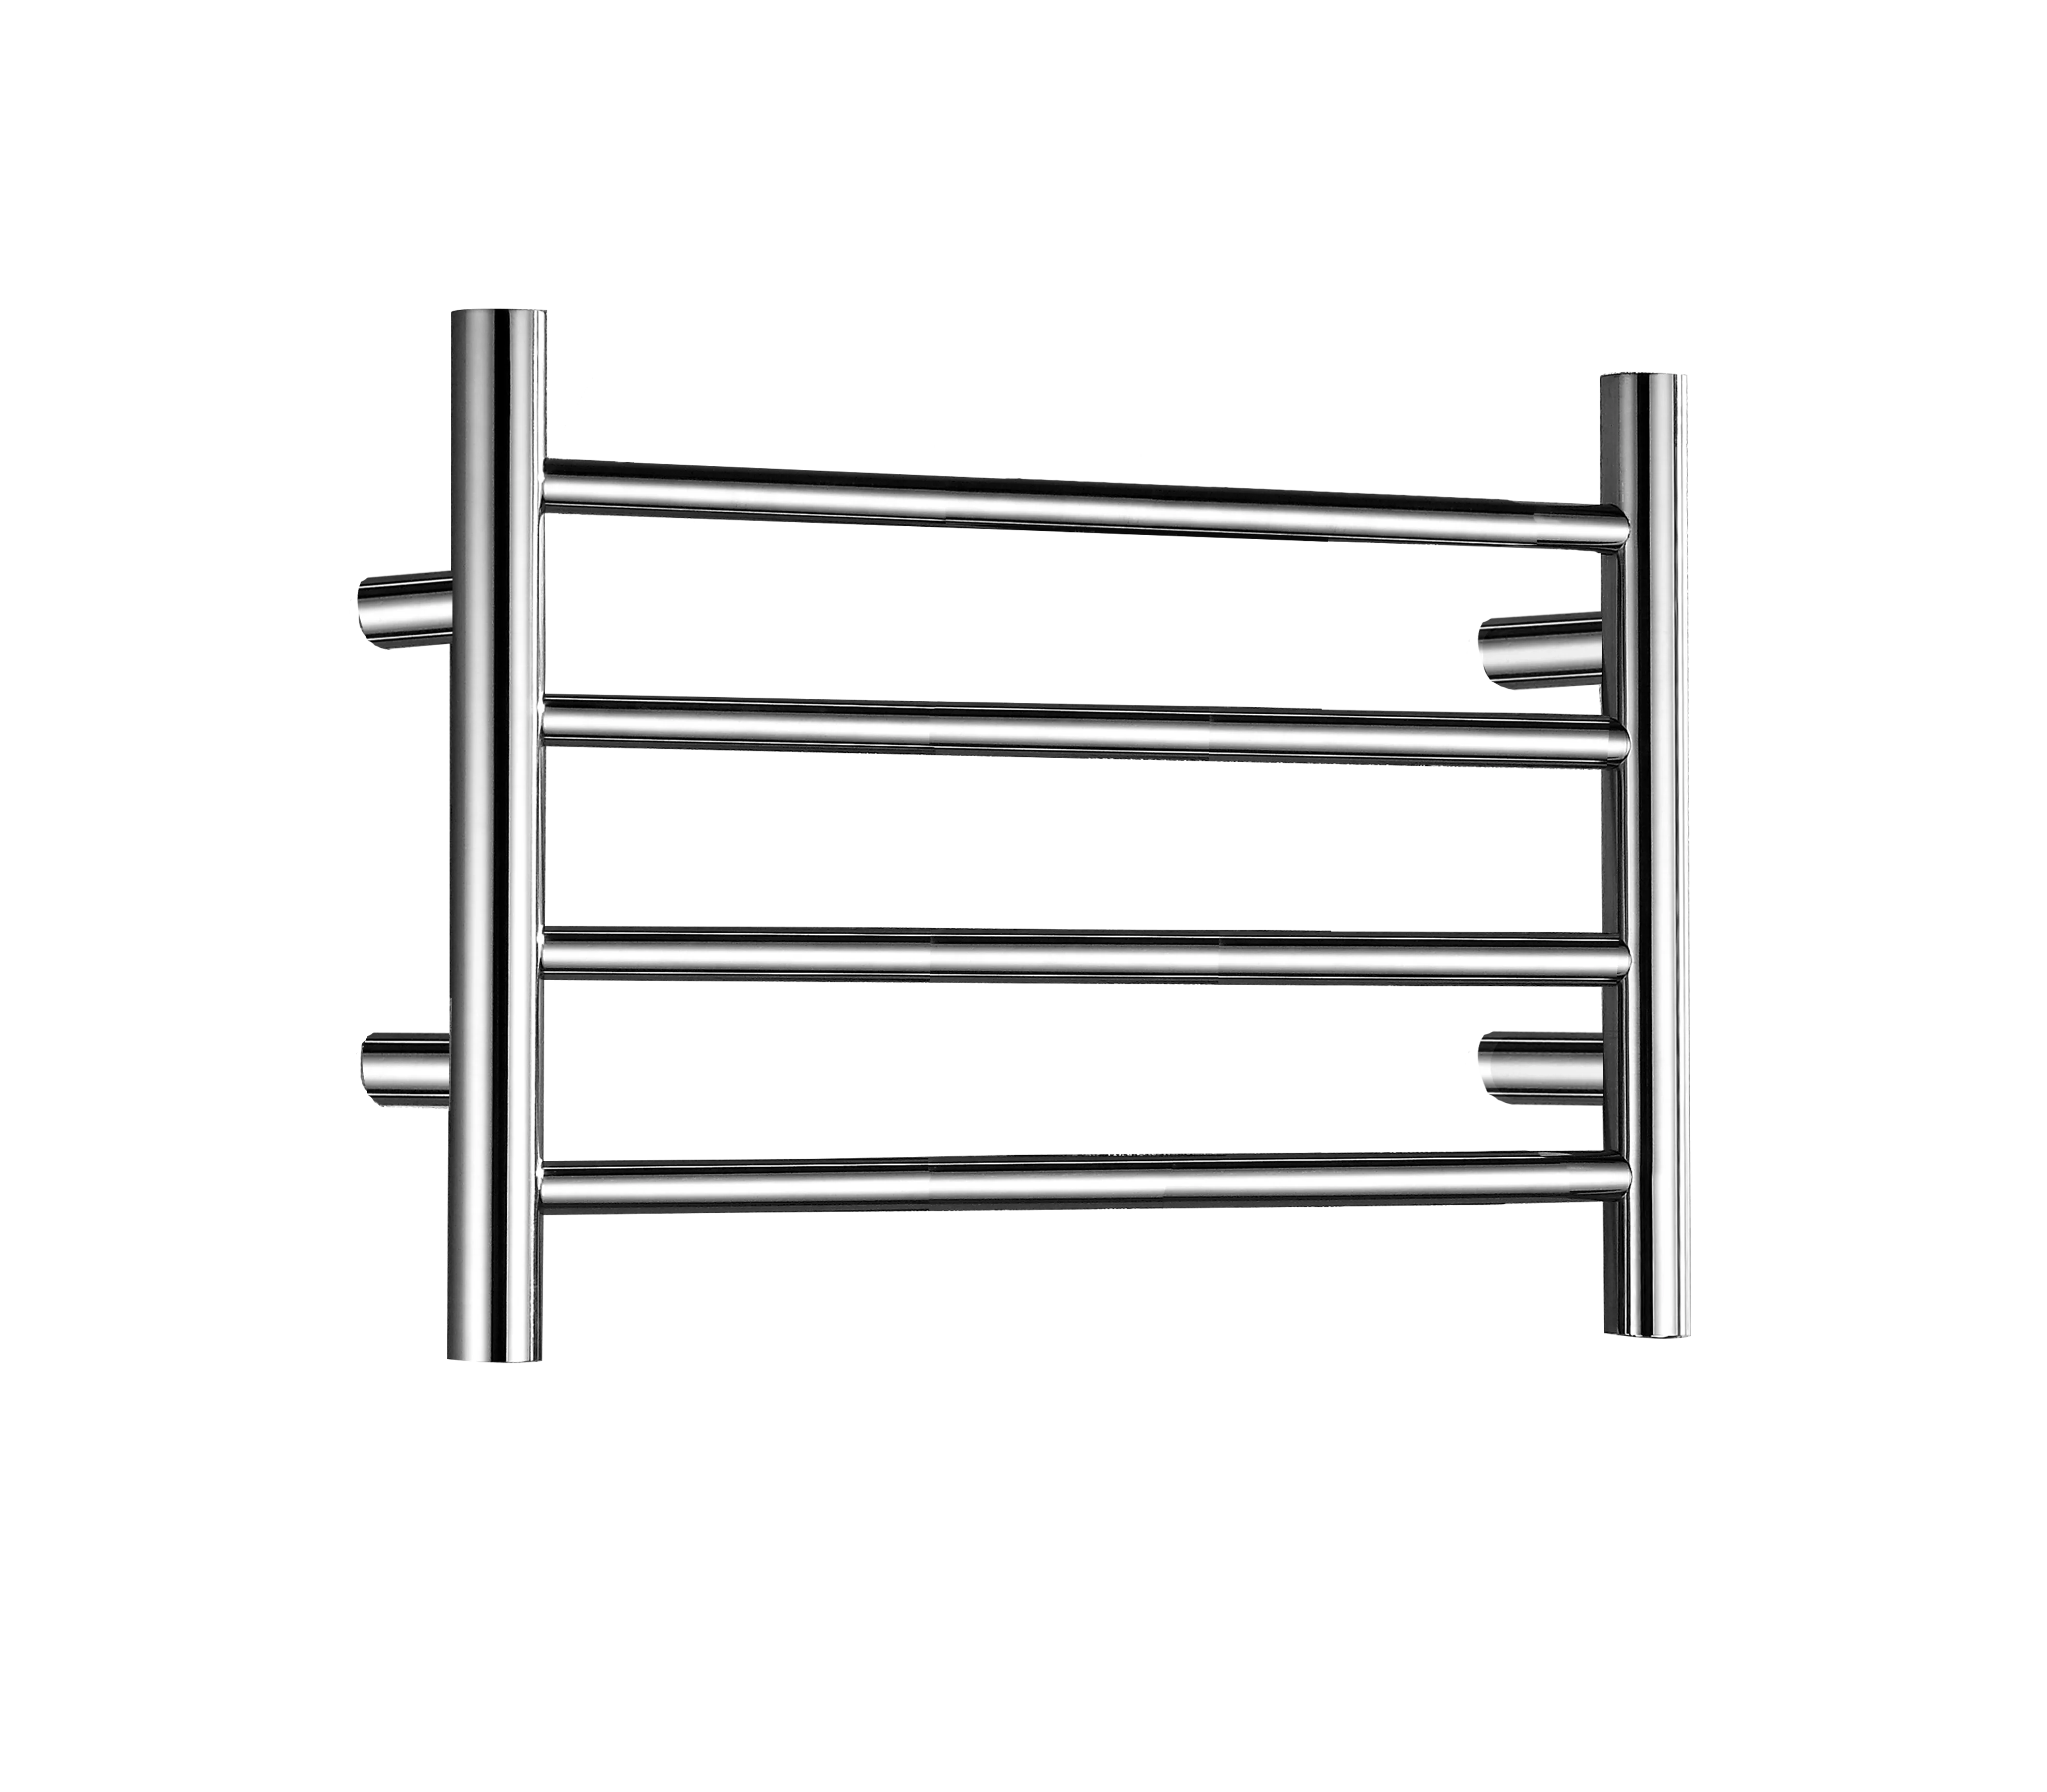 New Design Electric Heated Towel Rack With Temperature Control For Bathroom Stainless Steel Towel Warmer